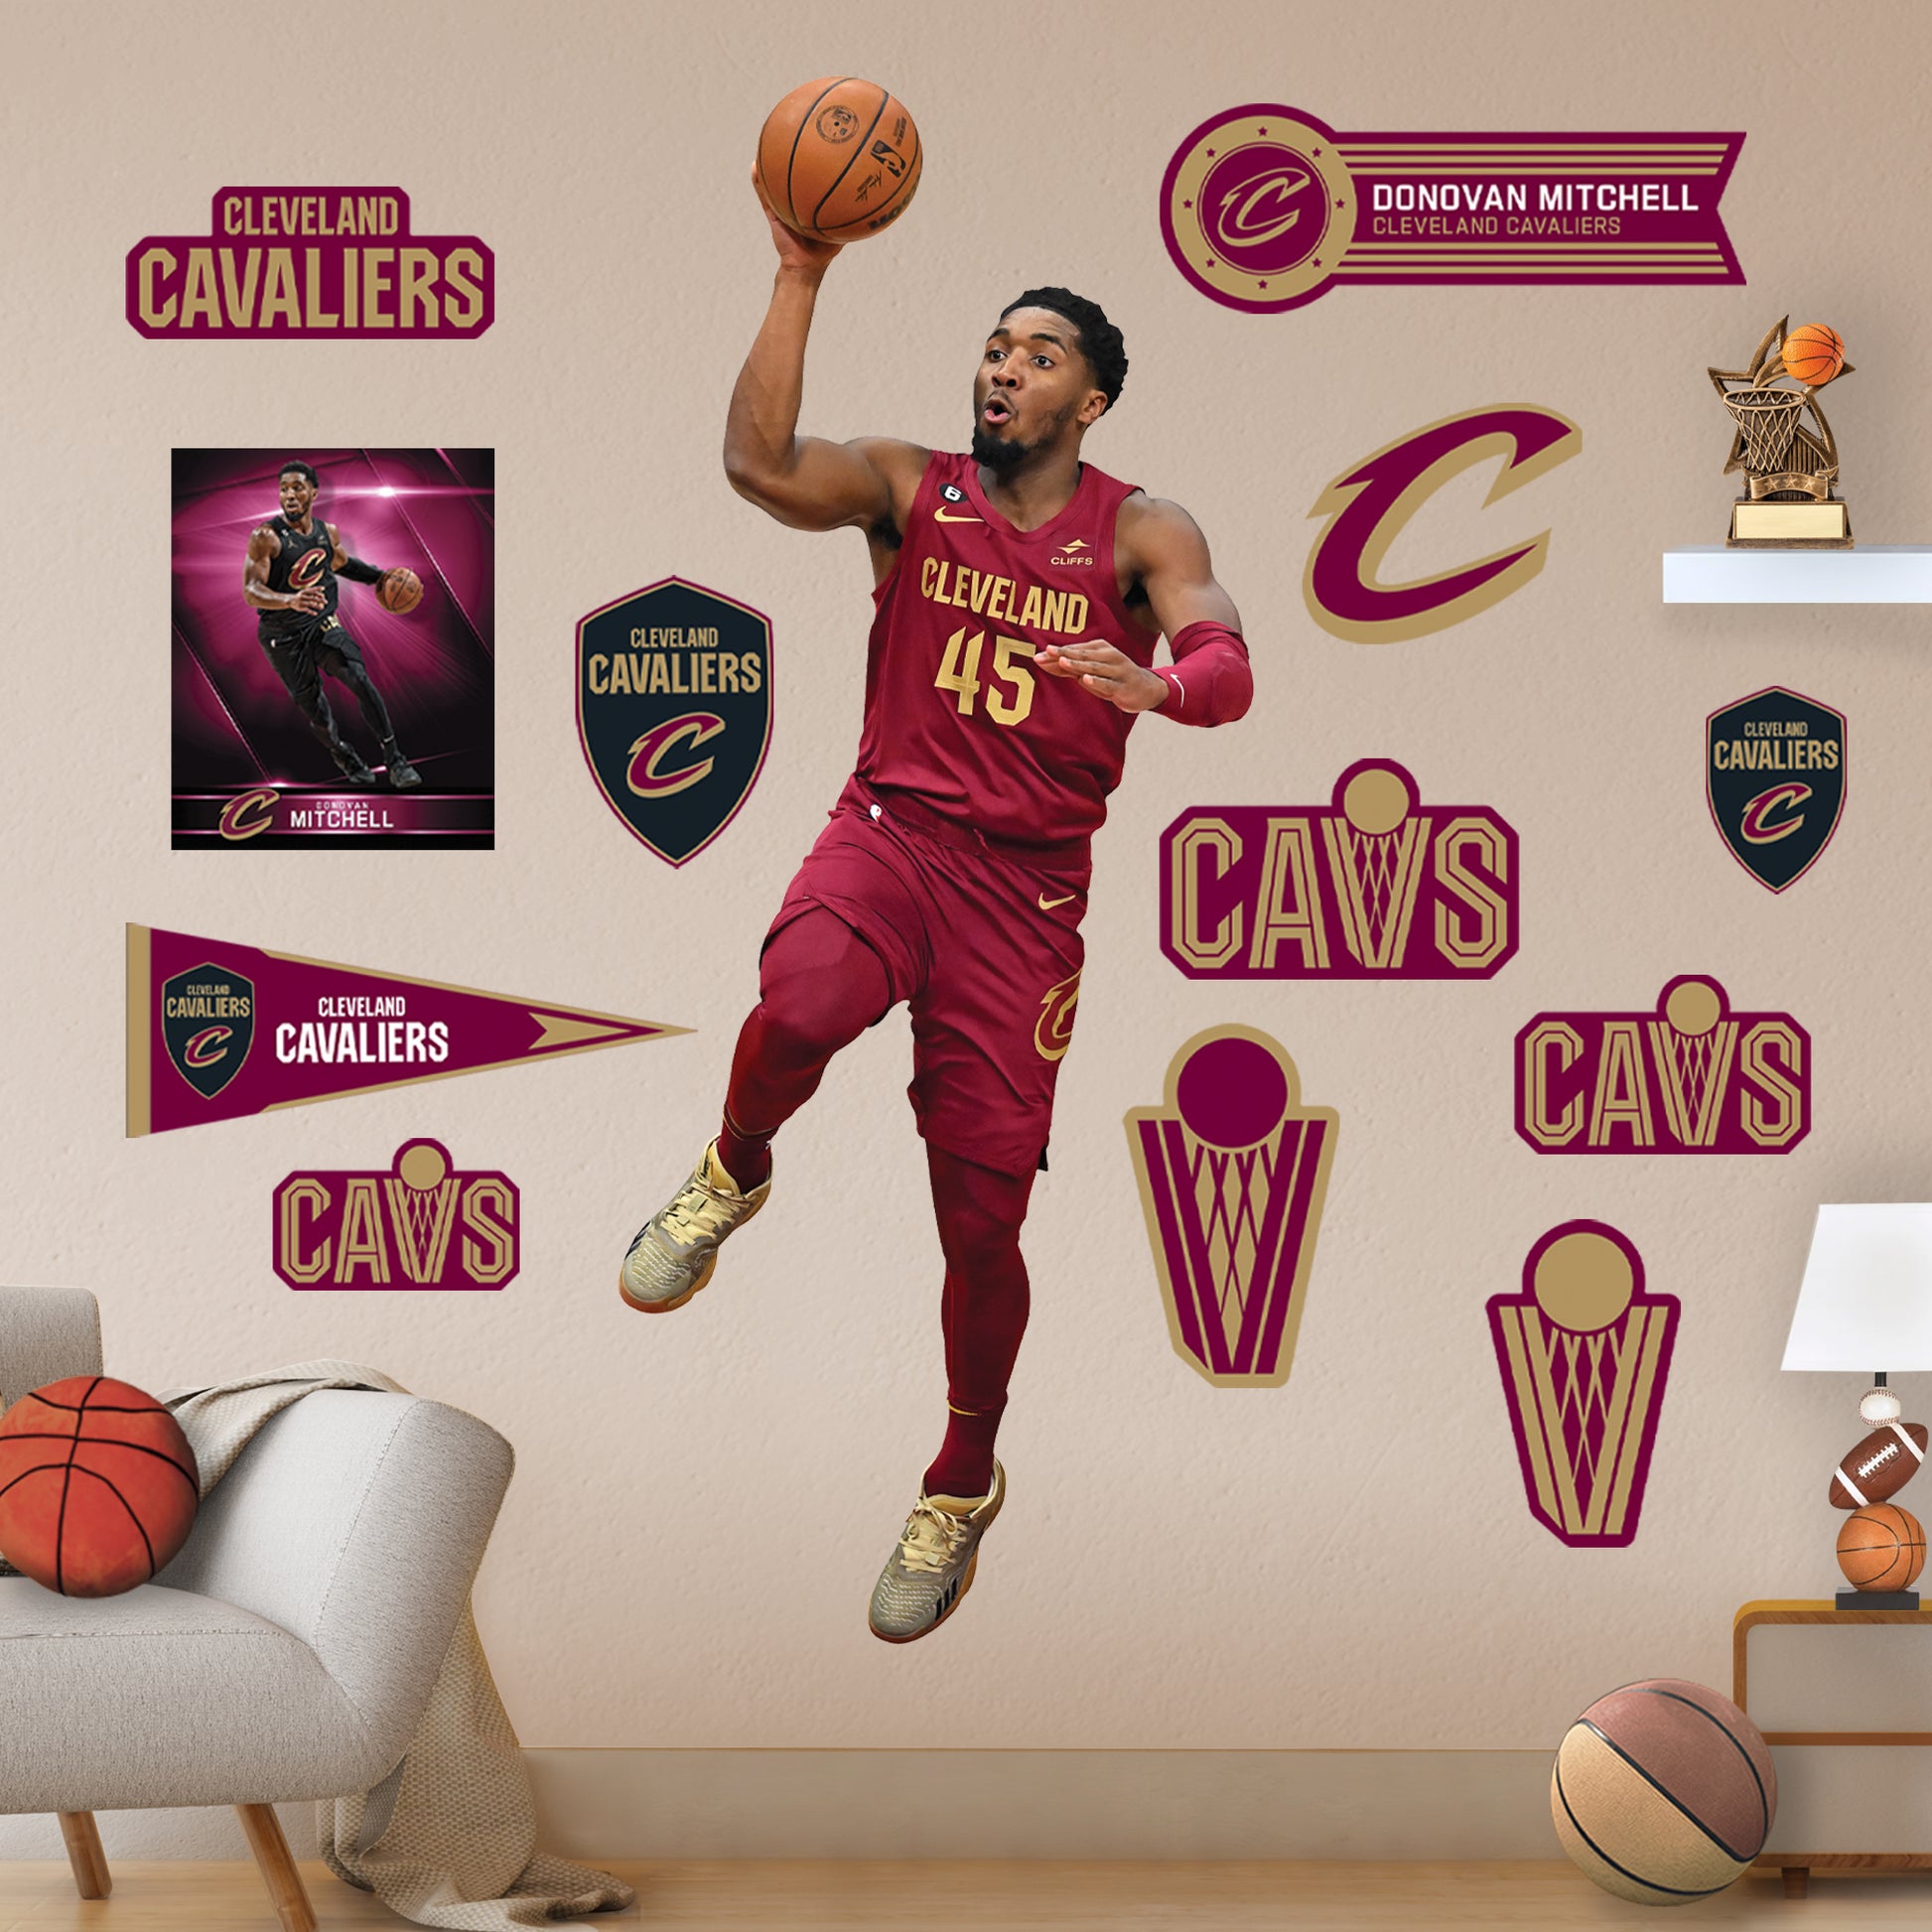 How to buy Donovan Mitchell's new Cleveland Cavaliers jersey 